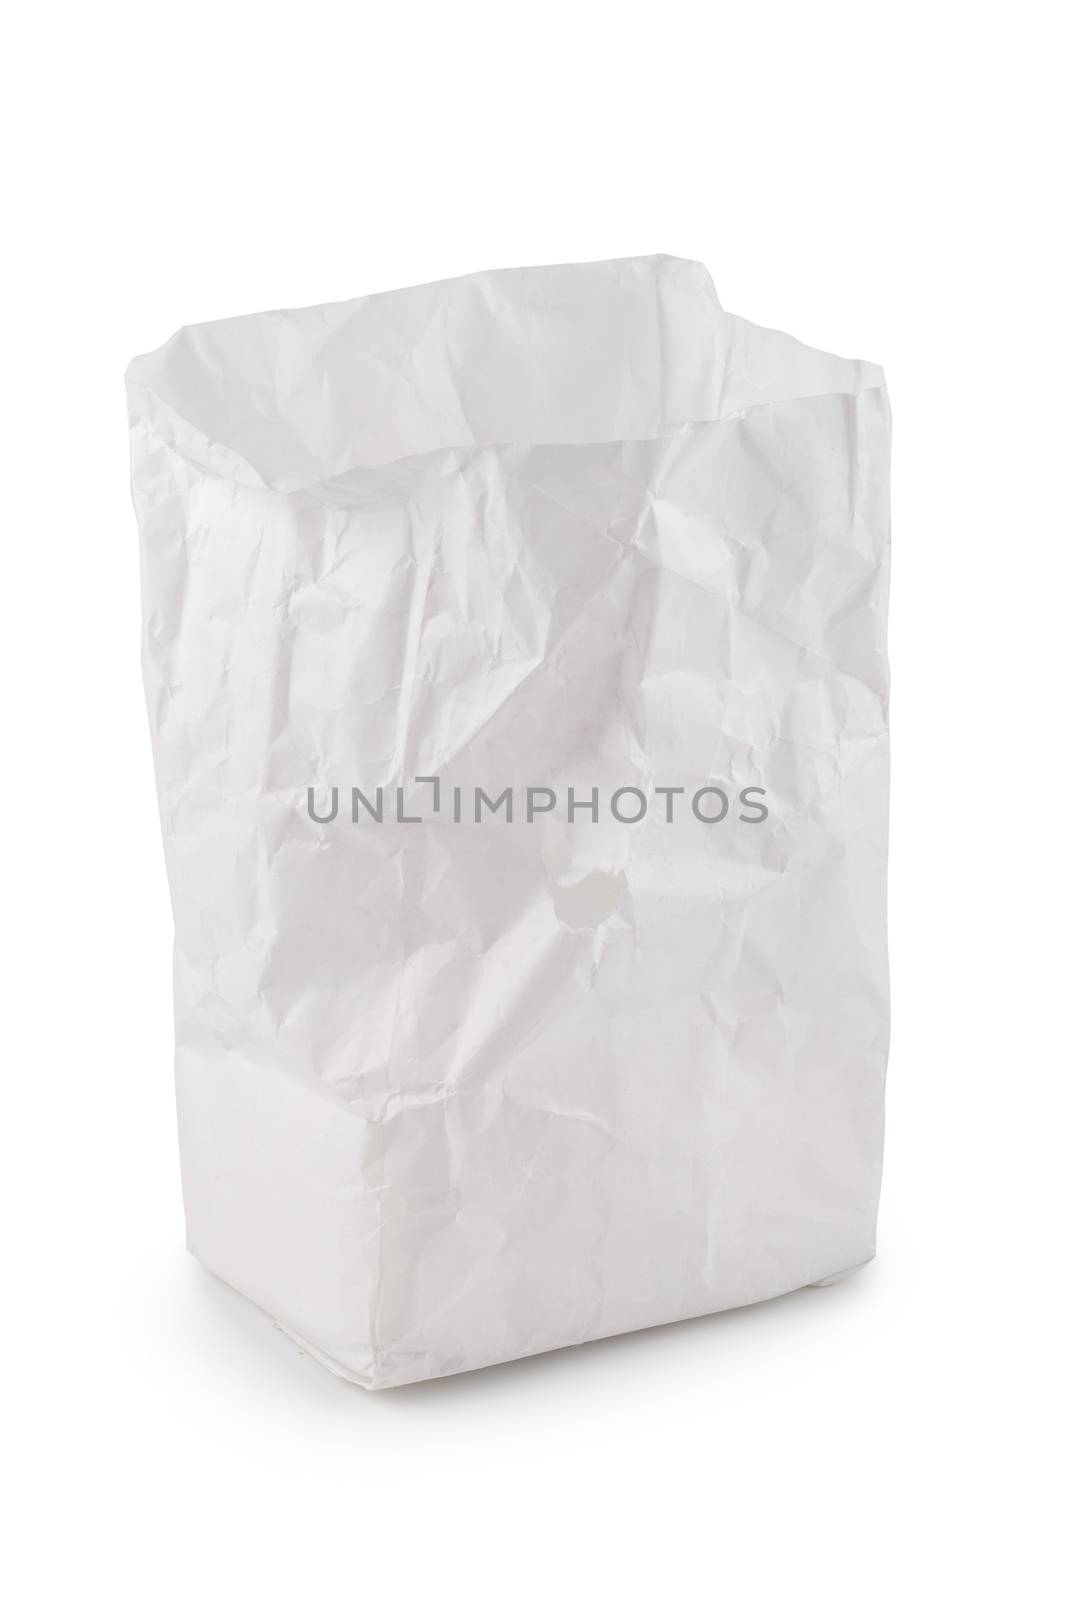 Used white paper bag isolated on a white background by kaiskynet